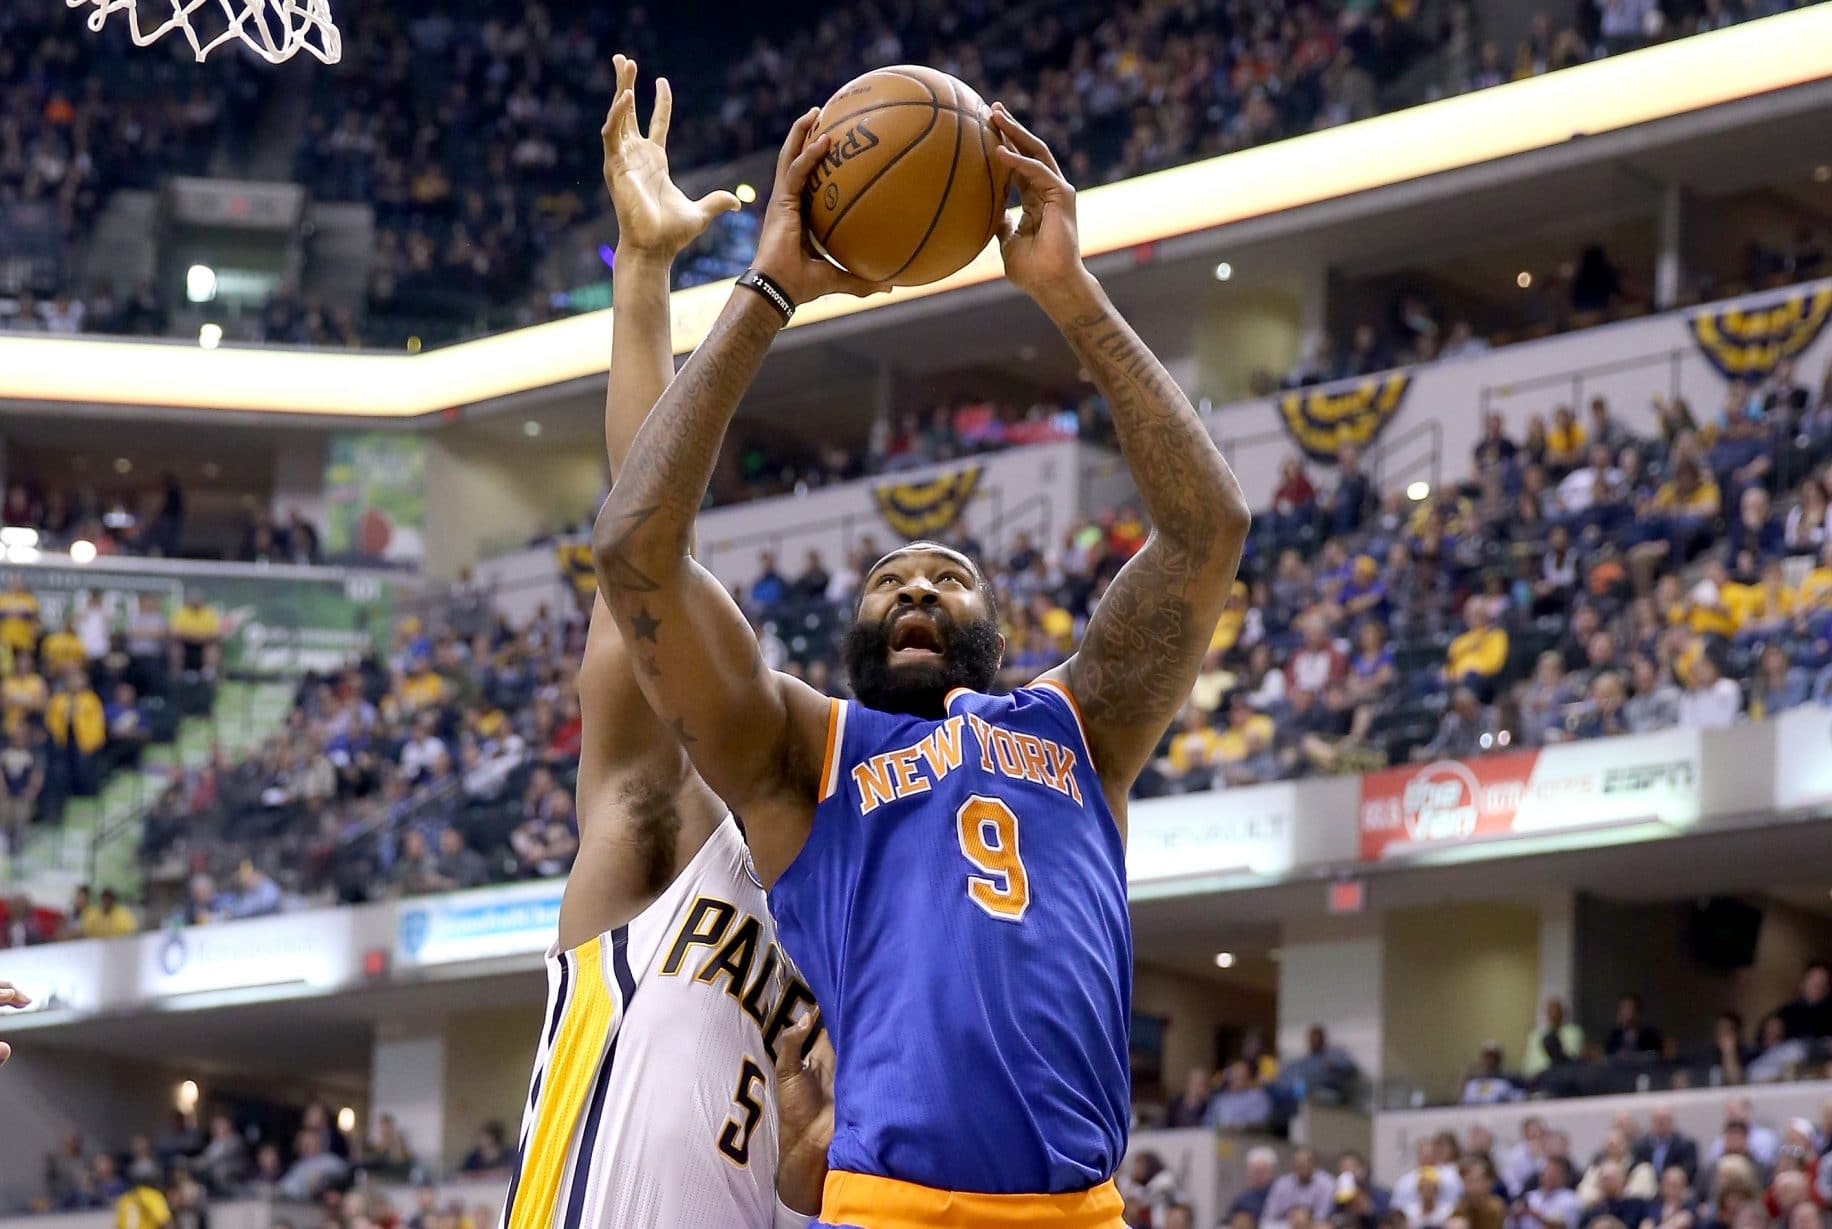 New York Knicks 97, Indiana Pacers 115: Indy shoots way to victory